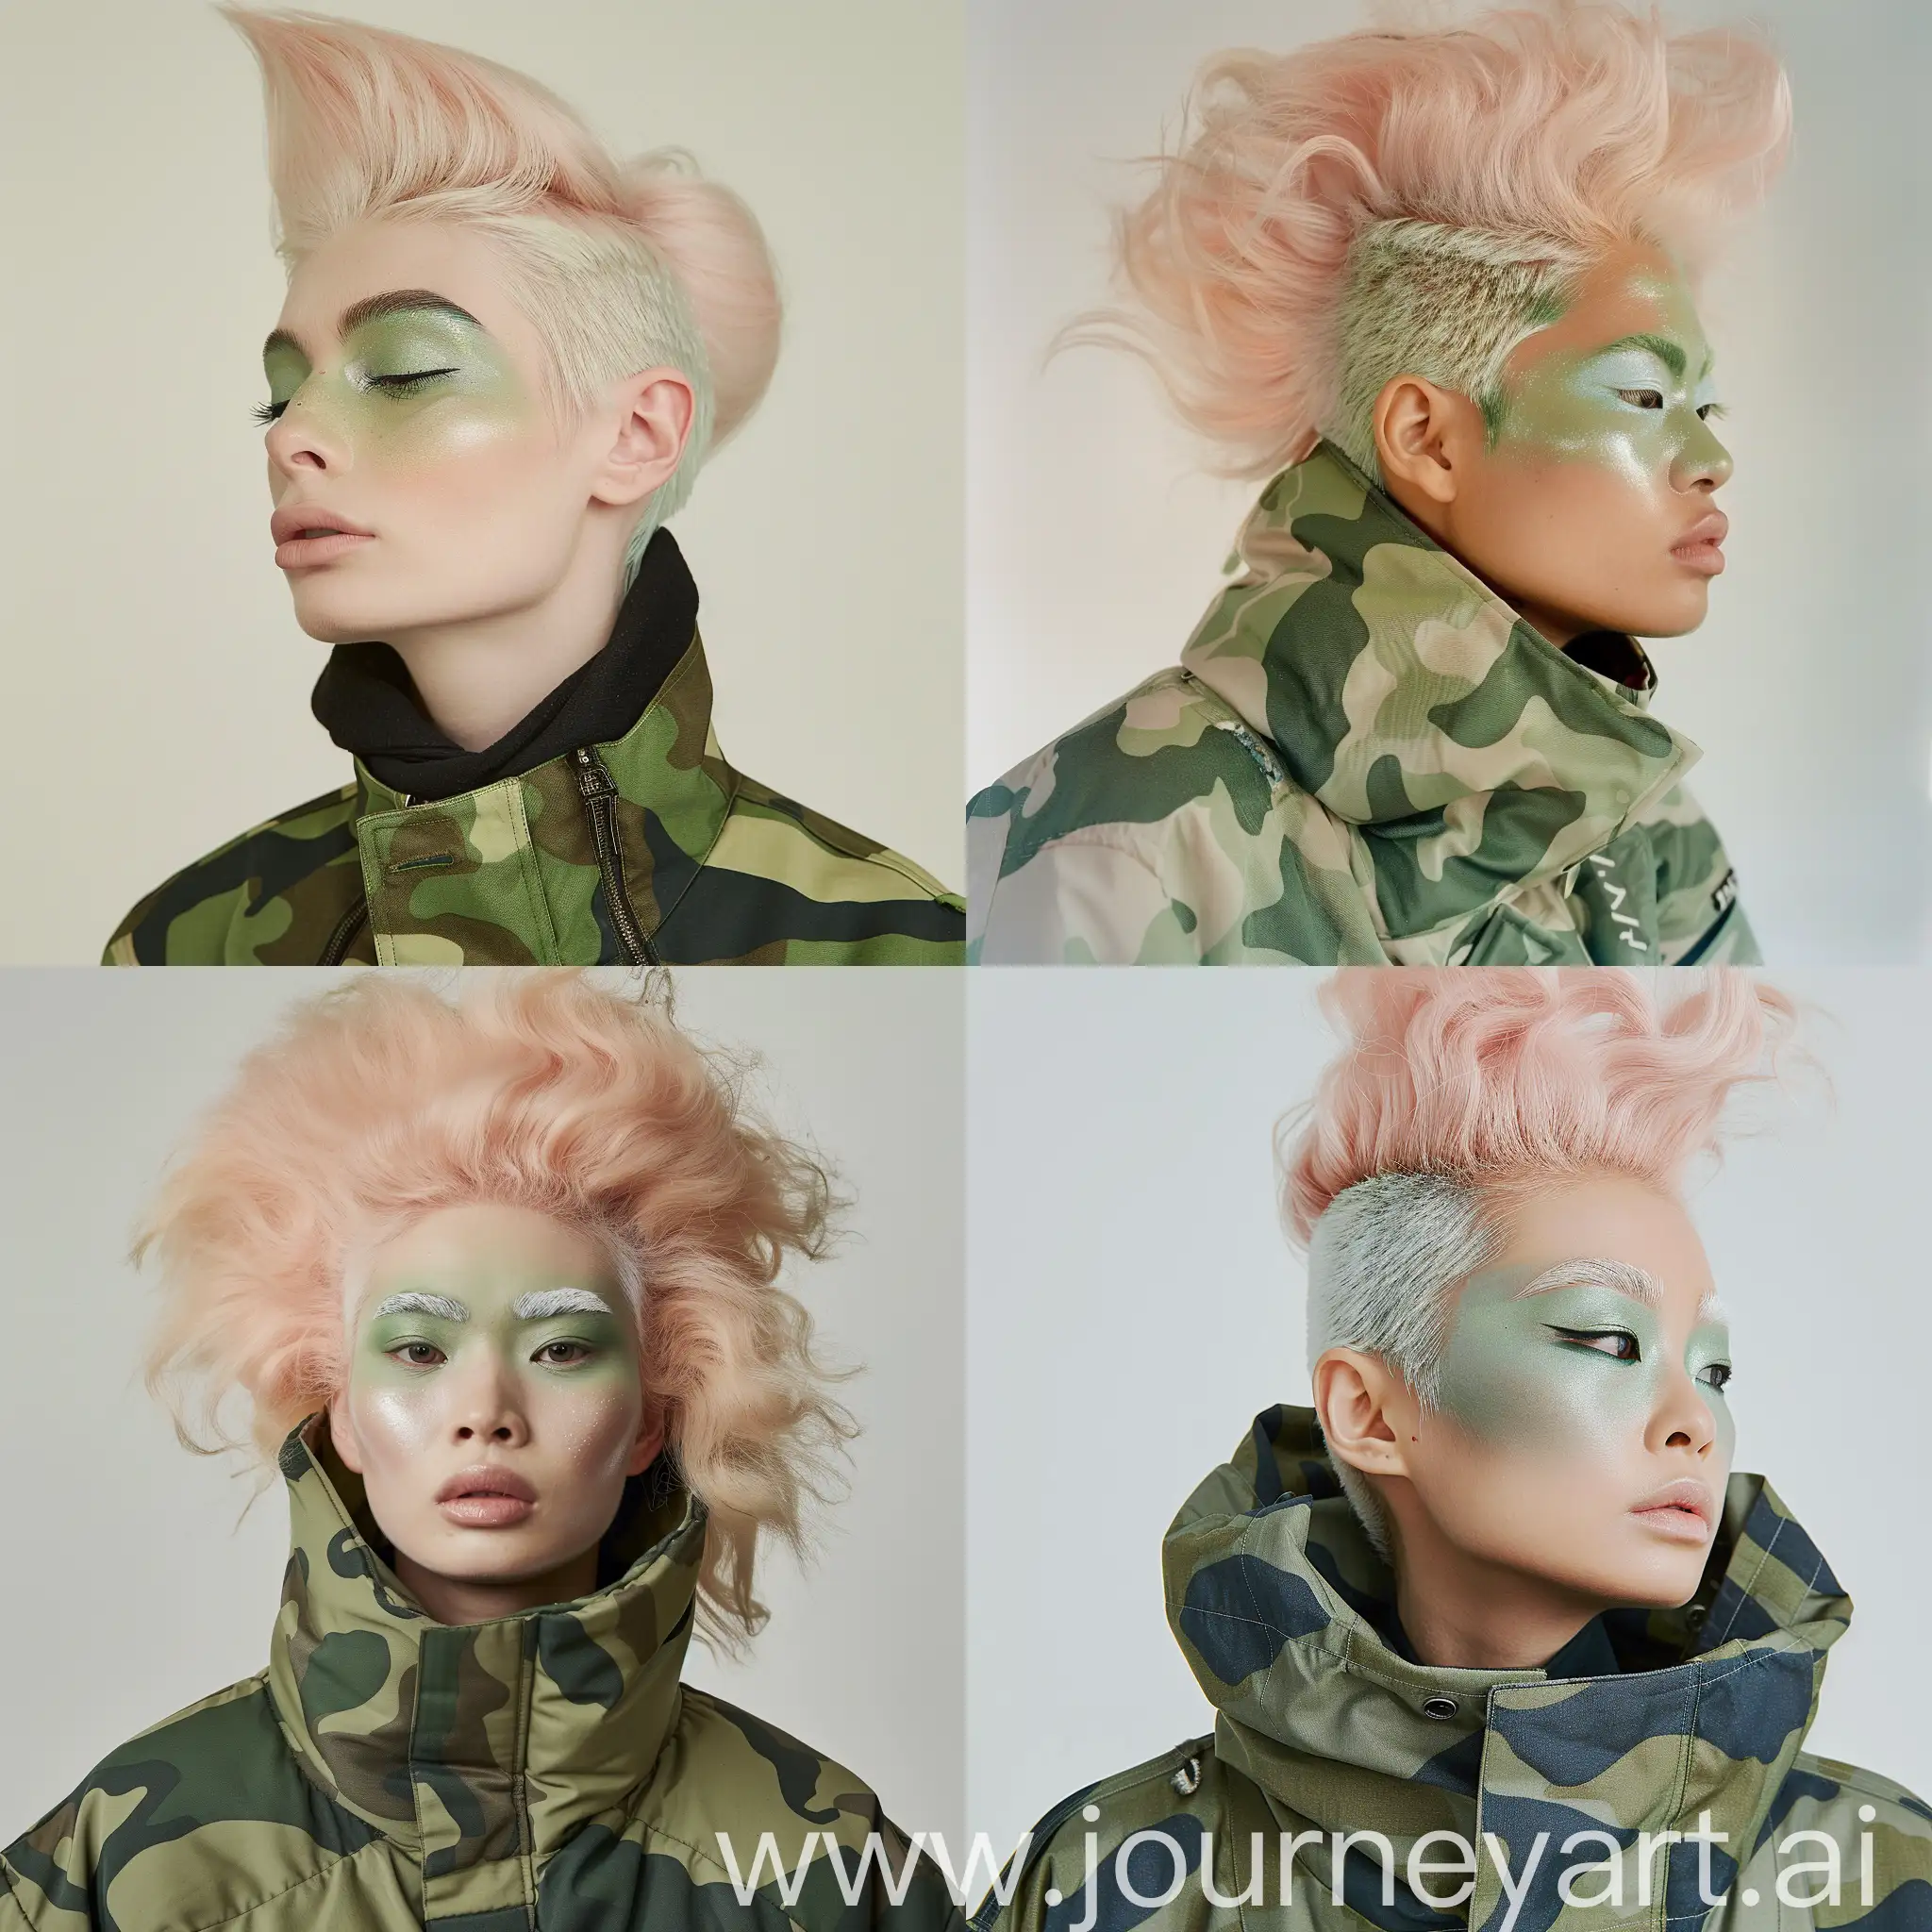 Fashionable-90s-Studio-Portrait-Camouflage-Jacket-and-Pearlescent-Green-Makeup